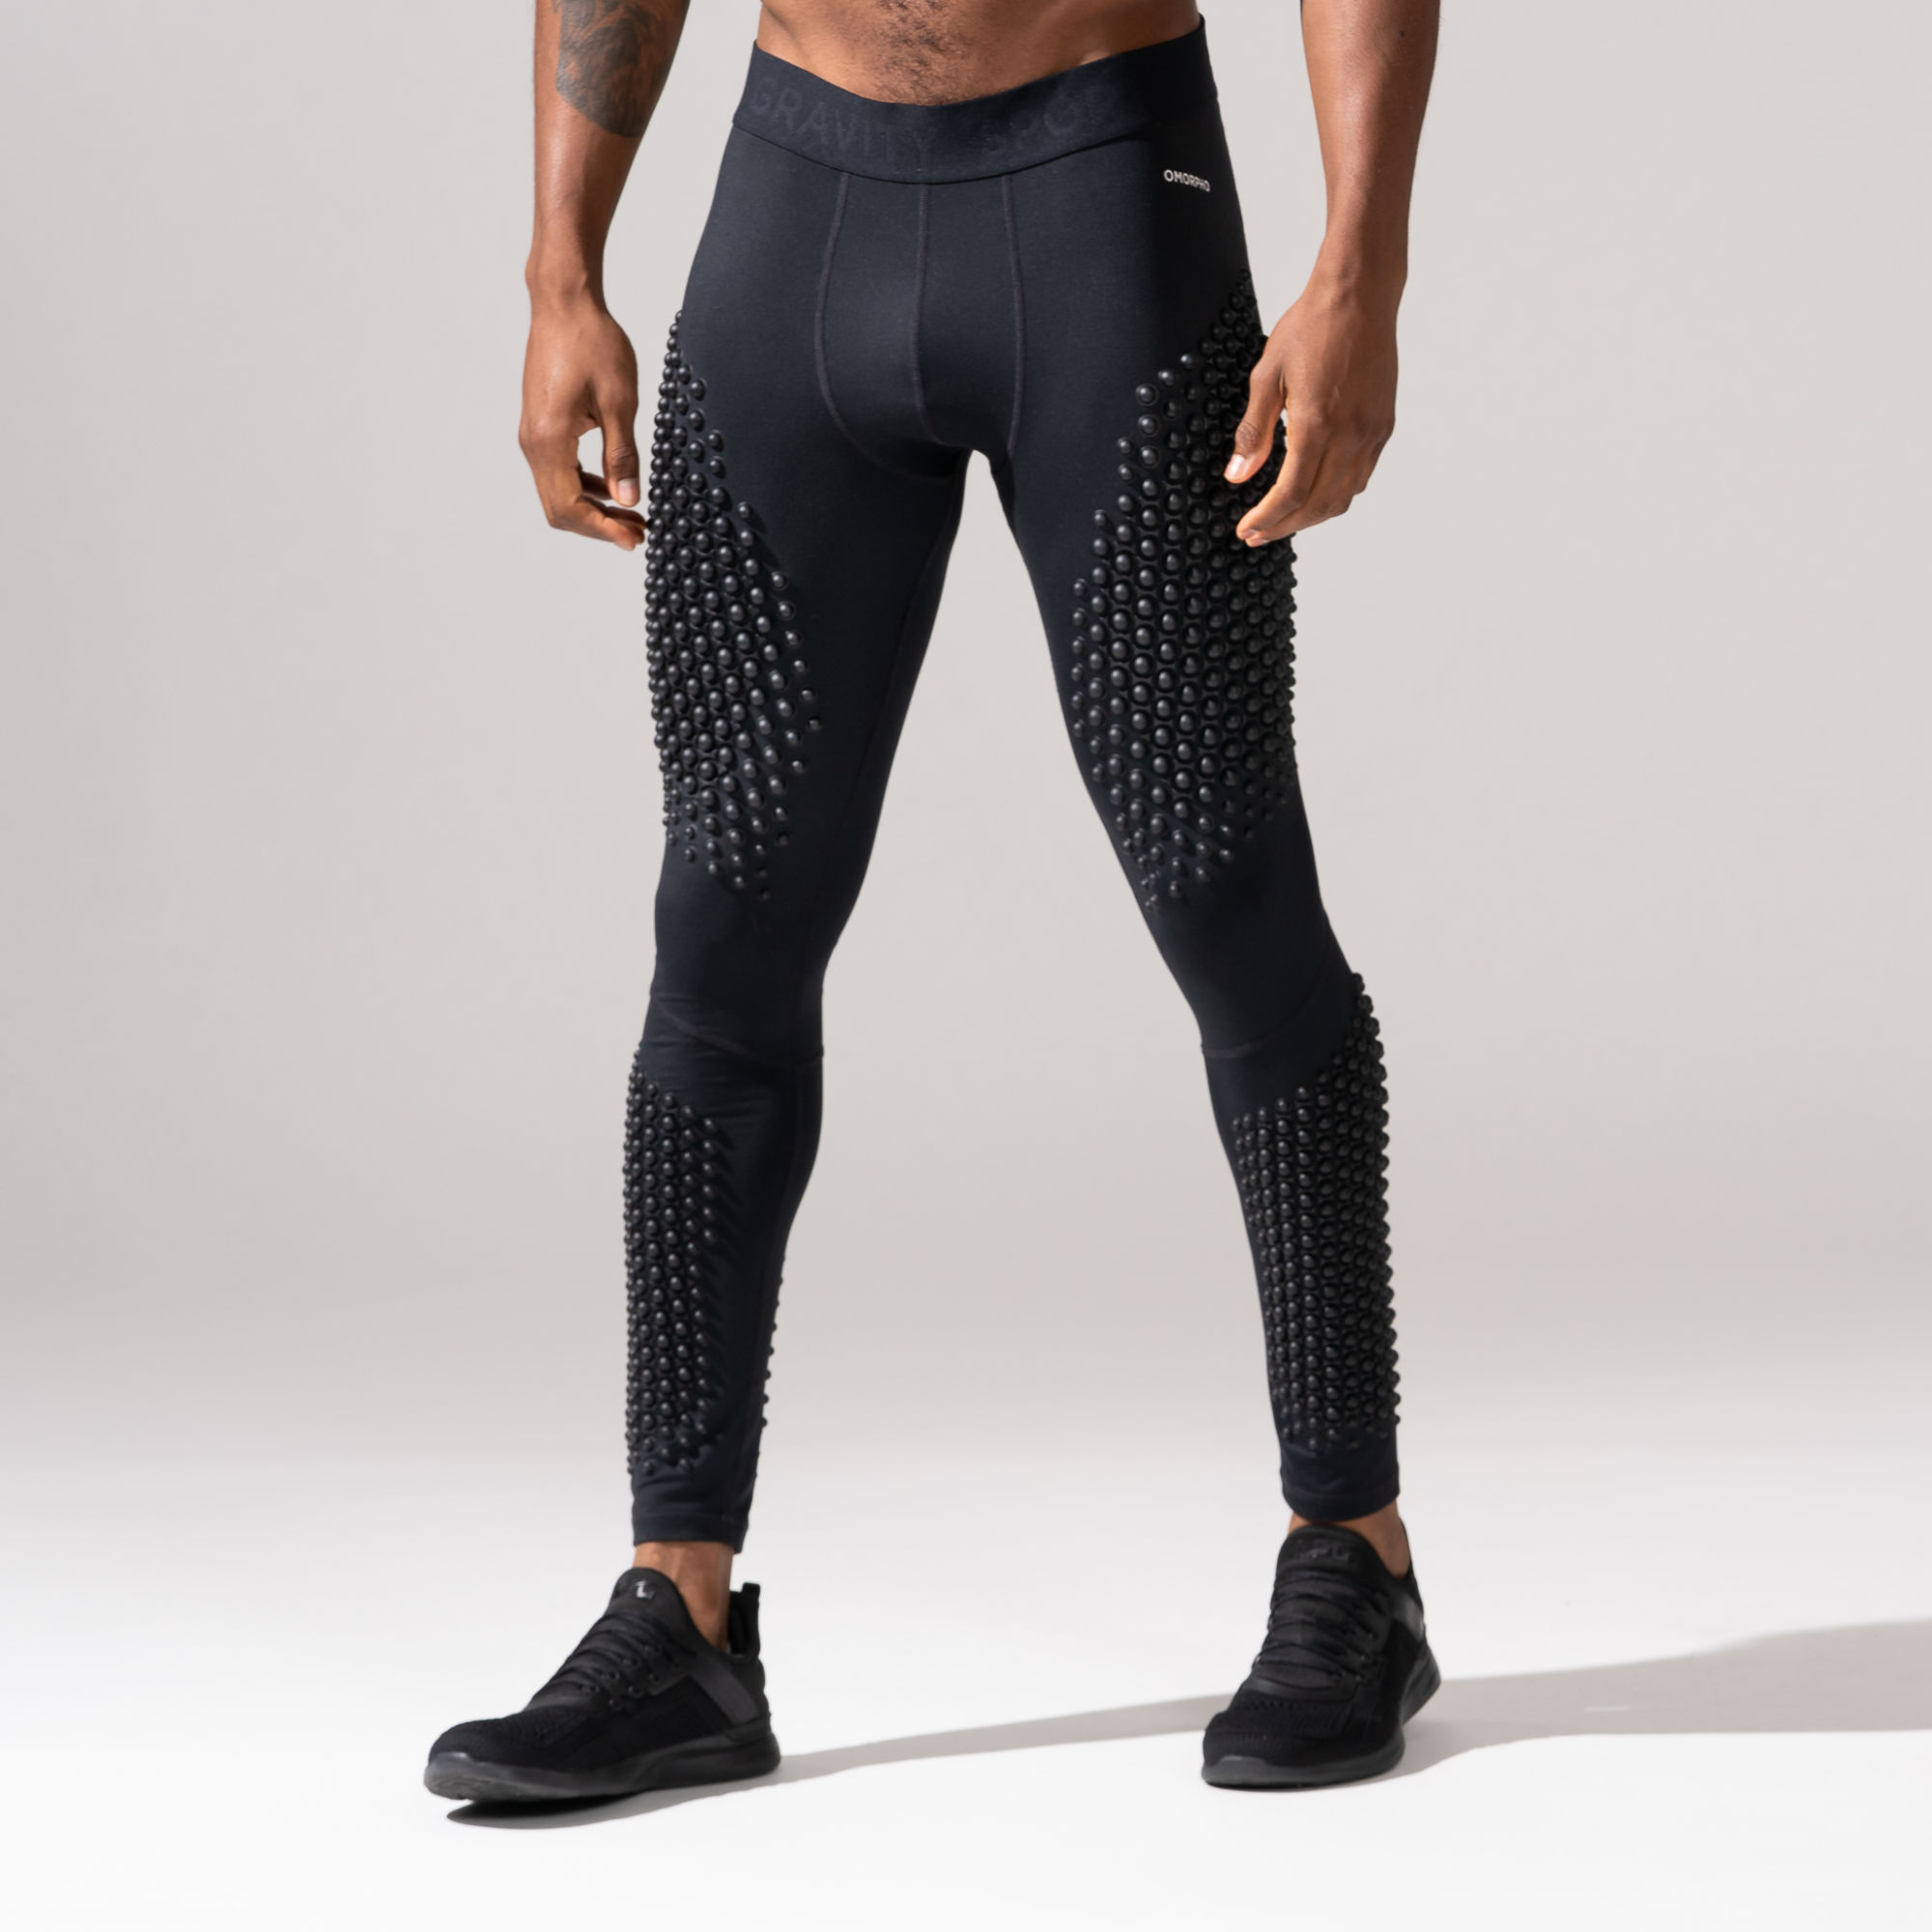 Front View of Male wearing Omorpho black G Tight 